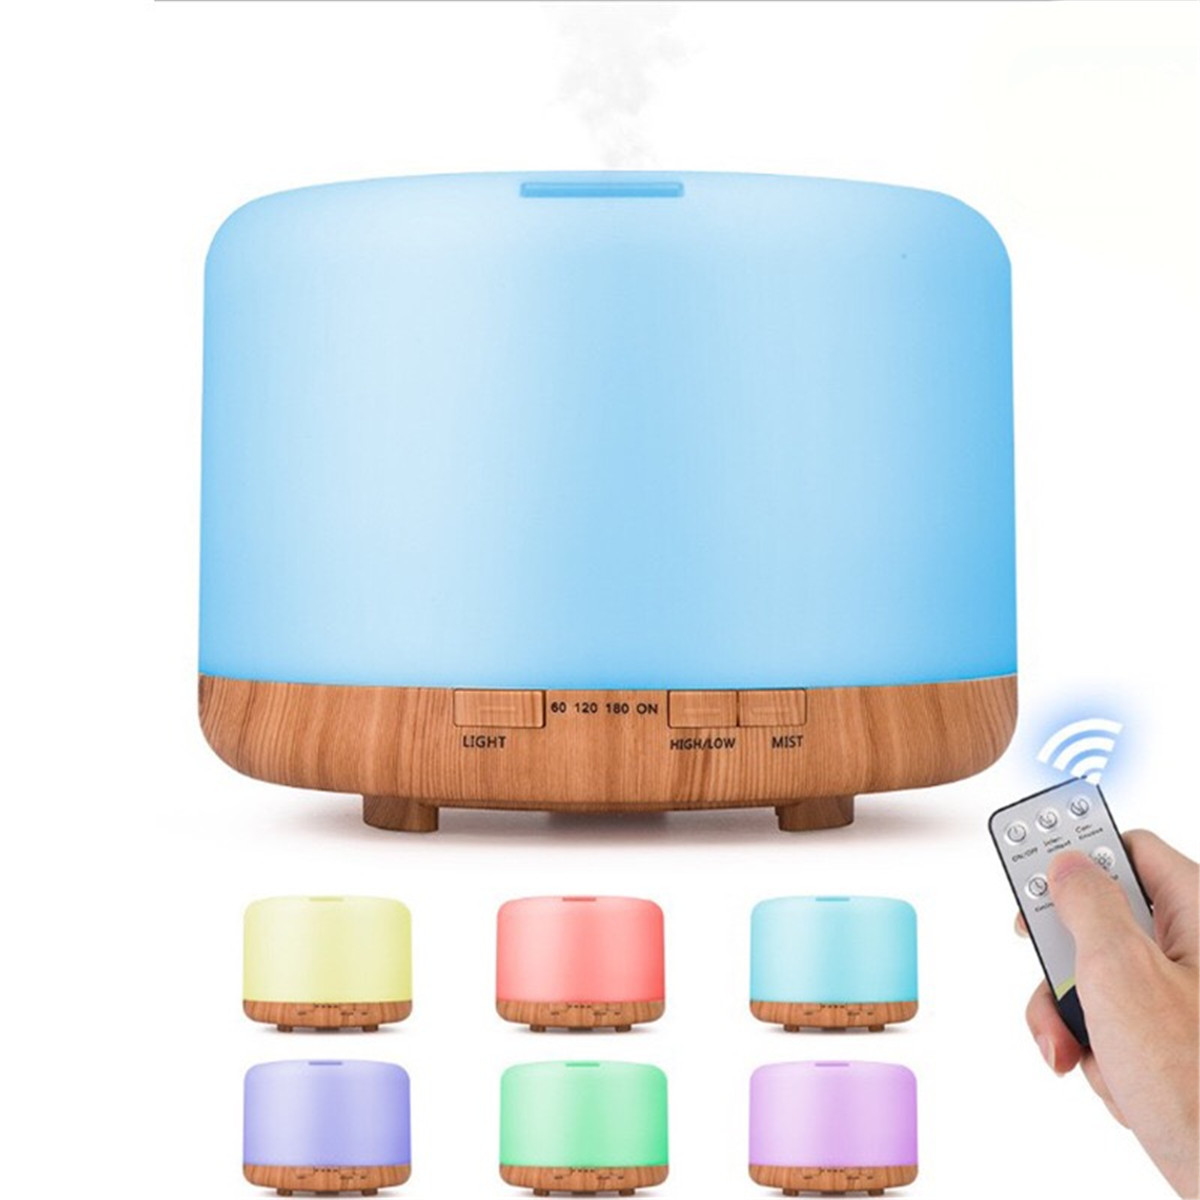 Bakeey Large Mist Spray 500ML Ultrasonic Aroma Diffuser Household Humidifier Colorful Night Light Household Air Purifying Humidifier